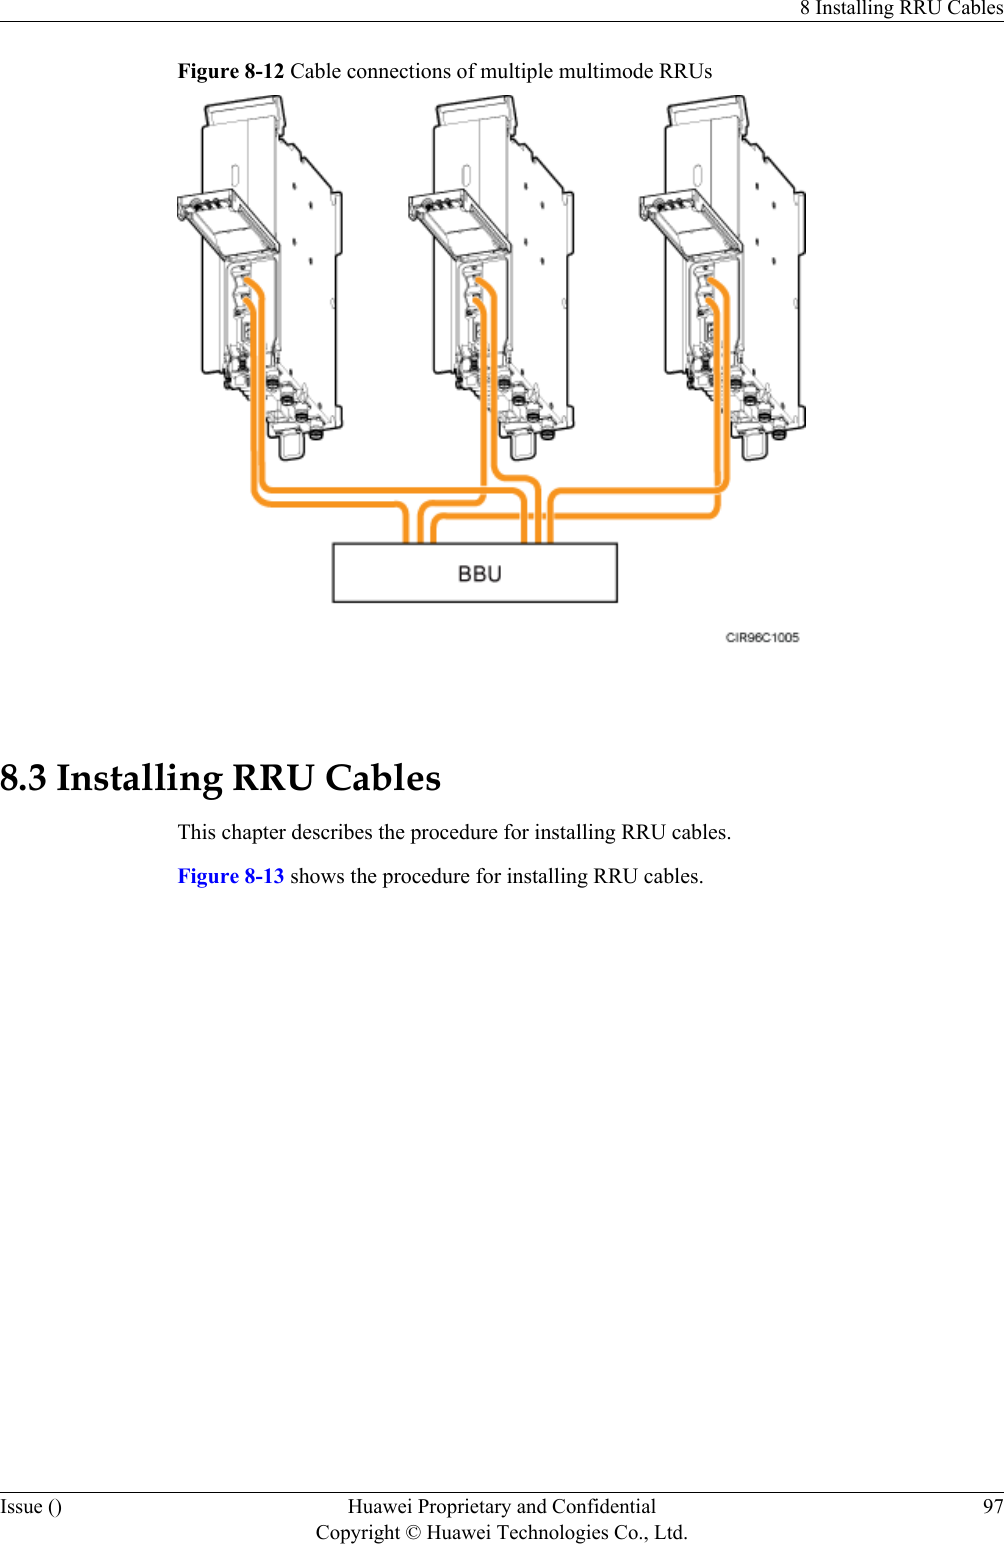 Figure 8-12 Cable connections of multiple multimode RRUs 8.3 Installing RRU CablesThis chapter describes the procedure for installing RRU cables.Figure 8-13 shows the procedure for installing RRU cables.8 Installing RRU CablesIssue () Huawei Proprietary and ConfidentialCopyright © Huawei Technologies Co., Ltd.97